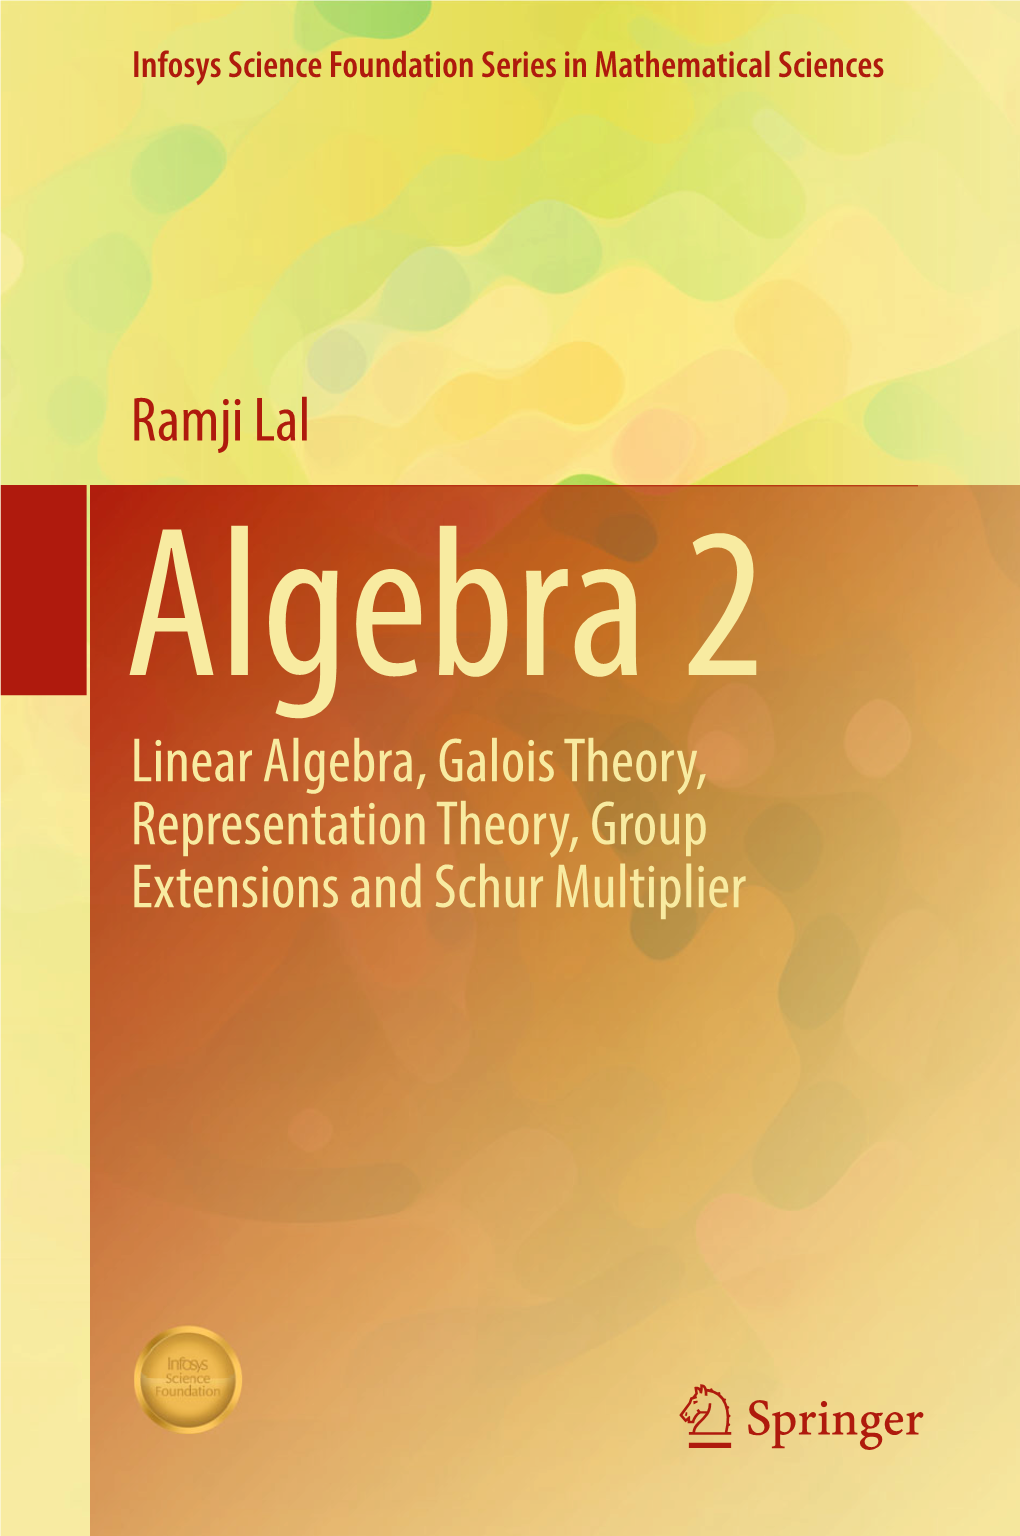 Ramji Lal Linear Algebra, Galois Theory, Representation Theory, Group Extensions and Schur Multiplier